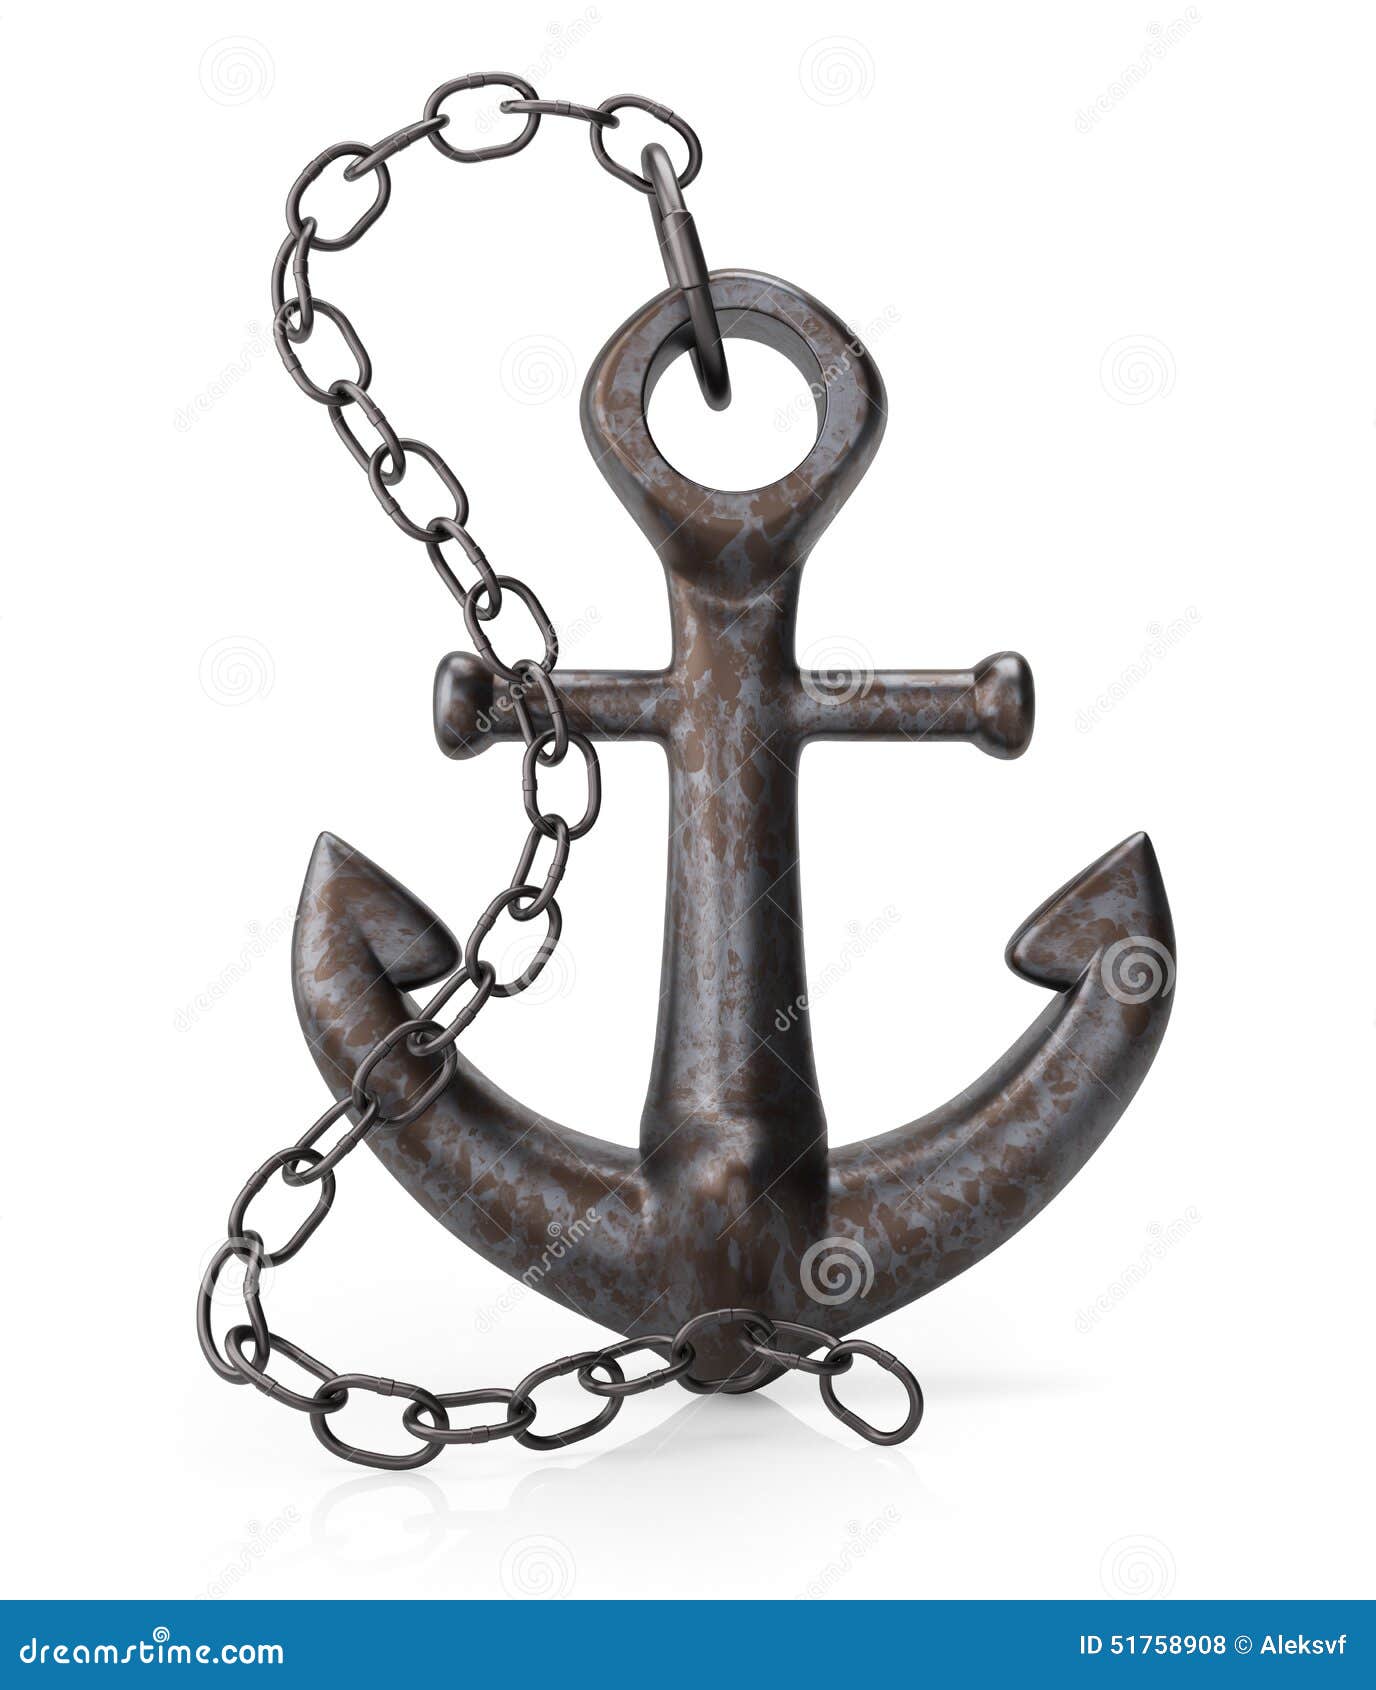 Rusty anchor with chain stock illustration. Illustration of steel ...